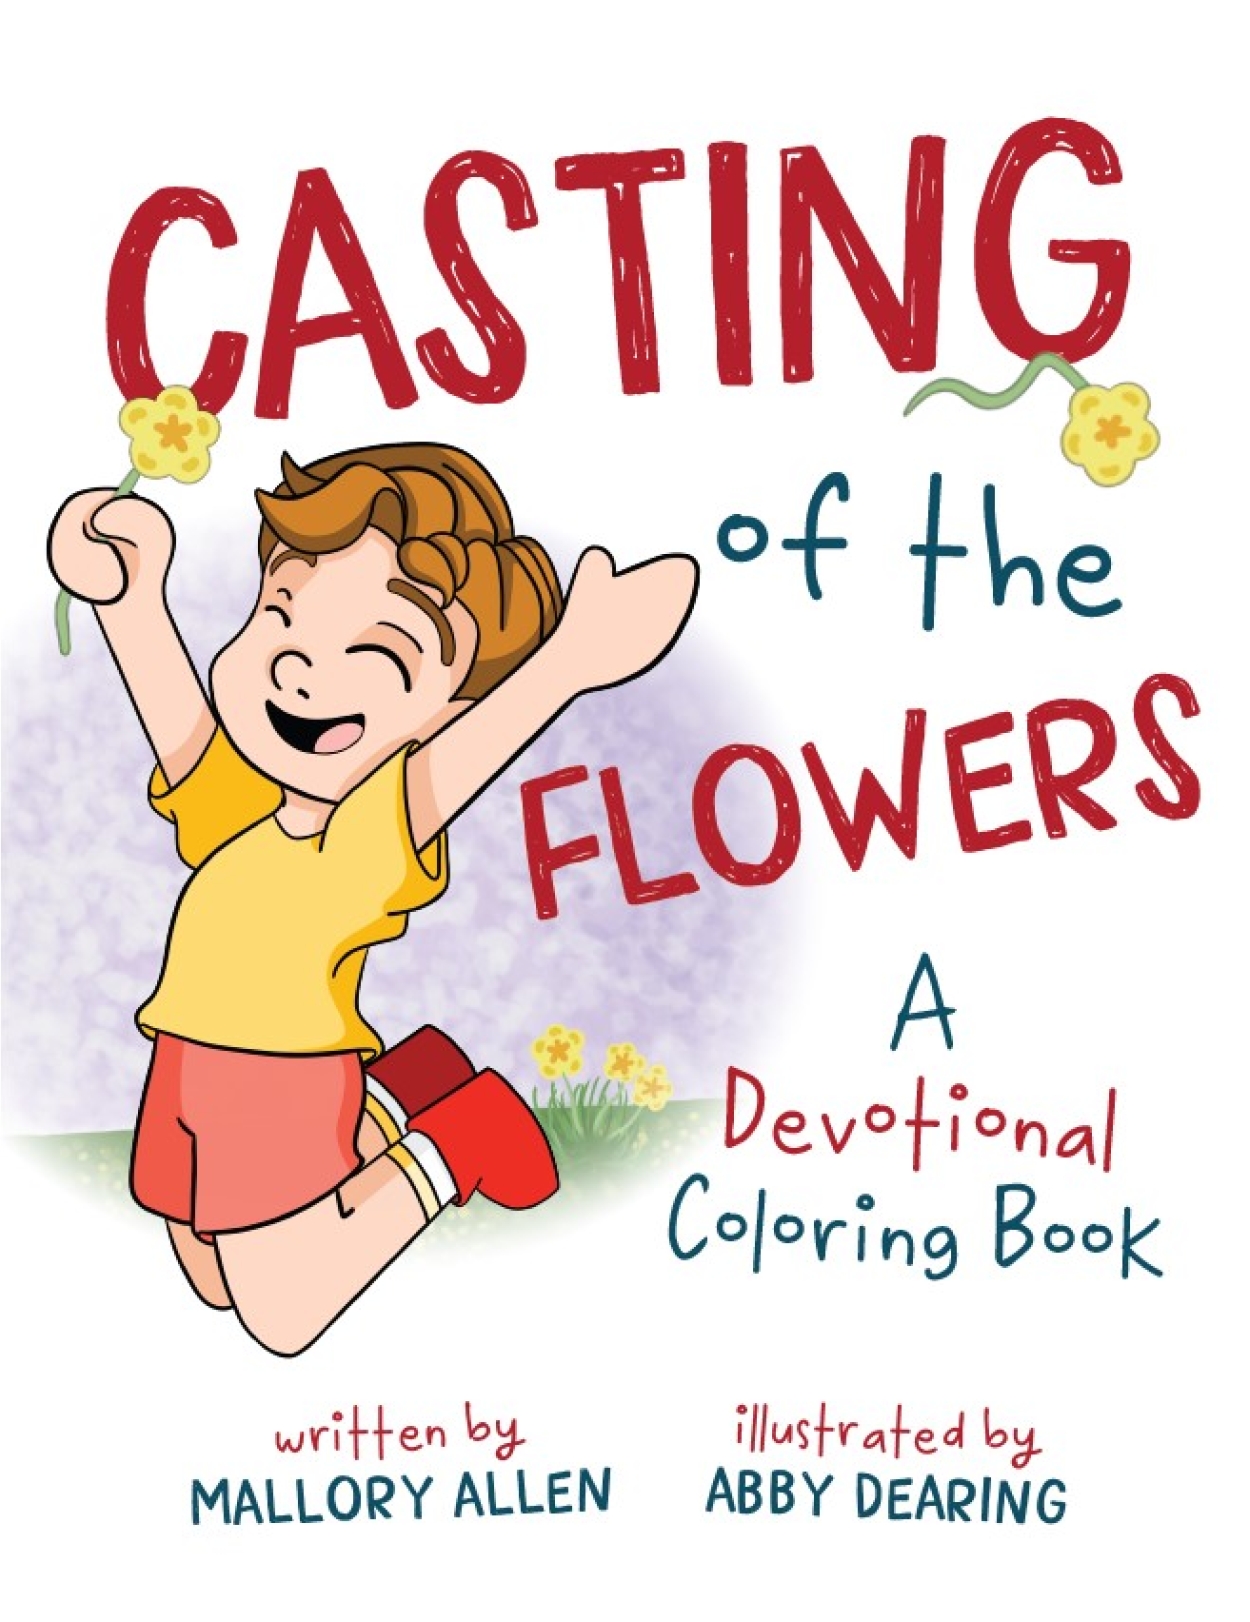 Bk261 casting of the flowers a devotional coloring book STORE DETAIL FRONT